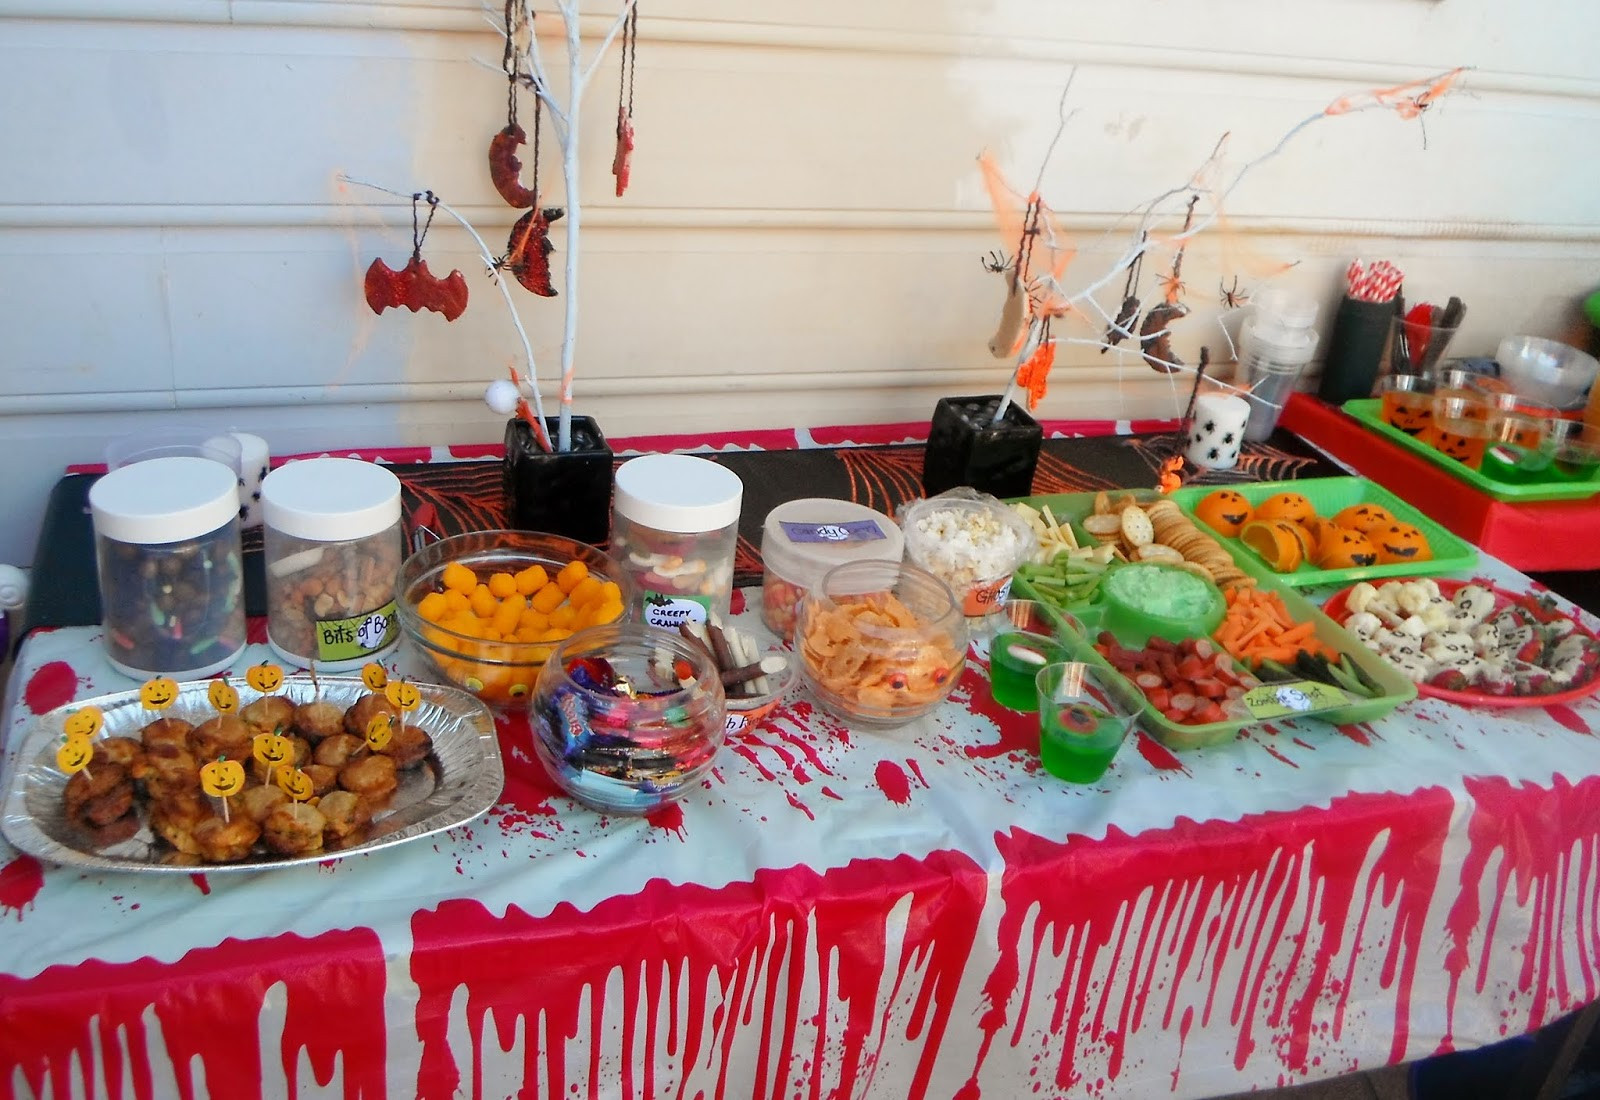 Halloween Party Snacks Ideas
 Adventures at home with Mum Halloween Party Food